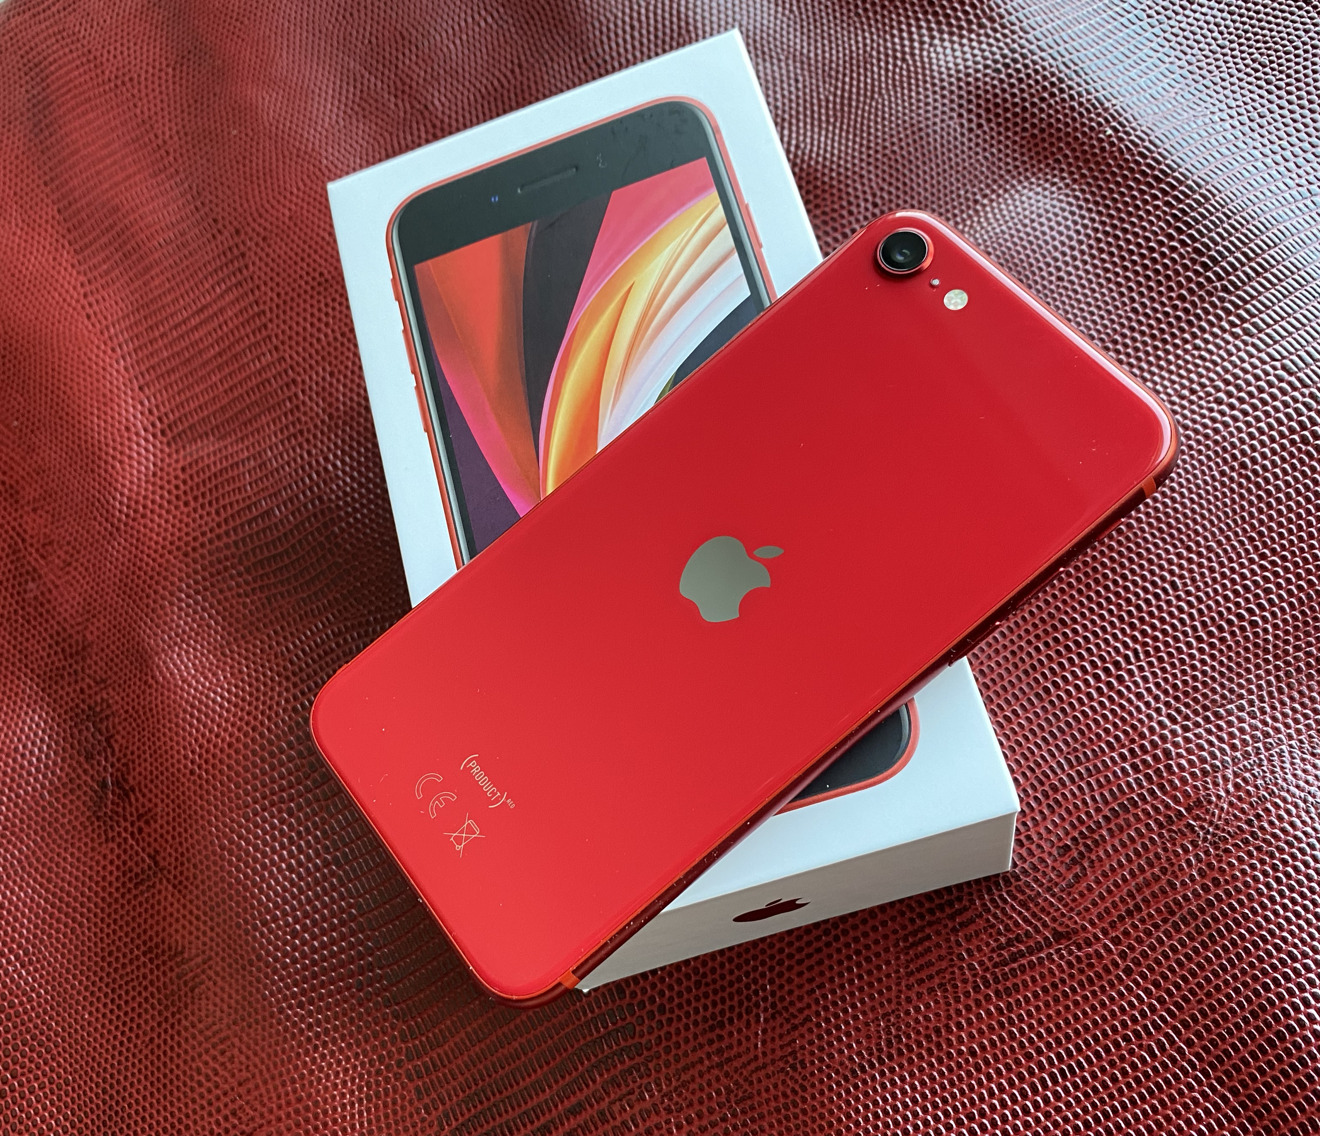 Apple iphone se 2020 64gb. Iphone se (2020) 64gb Red. Apple iphone se 2020 64gb Red. Iphone se (2020) 128gb Red. Apple iphone se(2020) product Red 64gb.